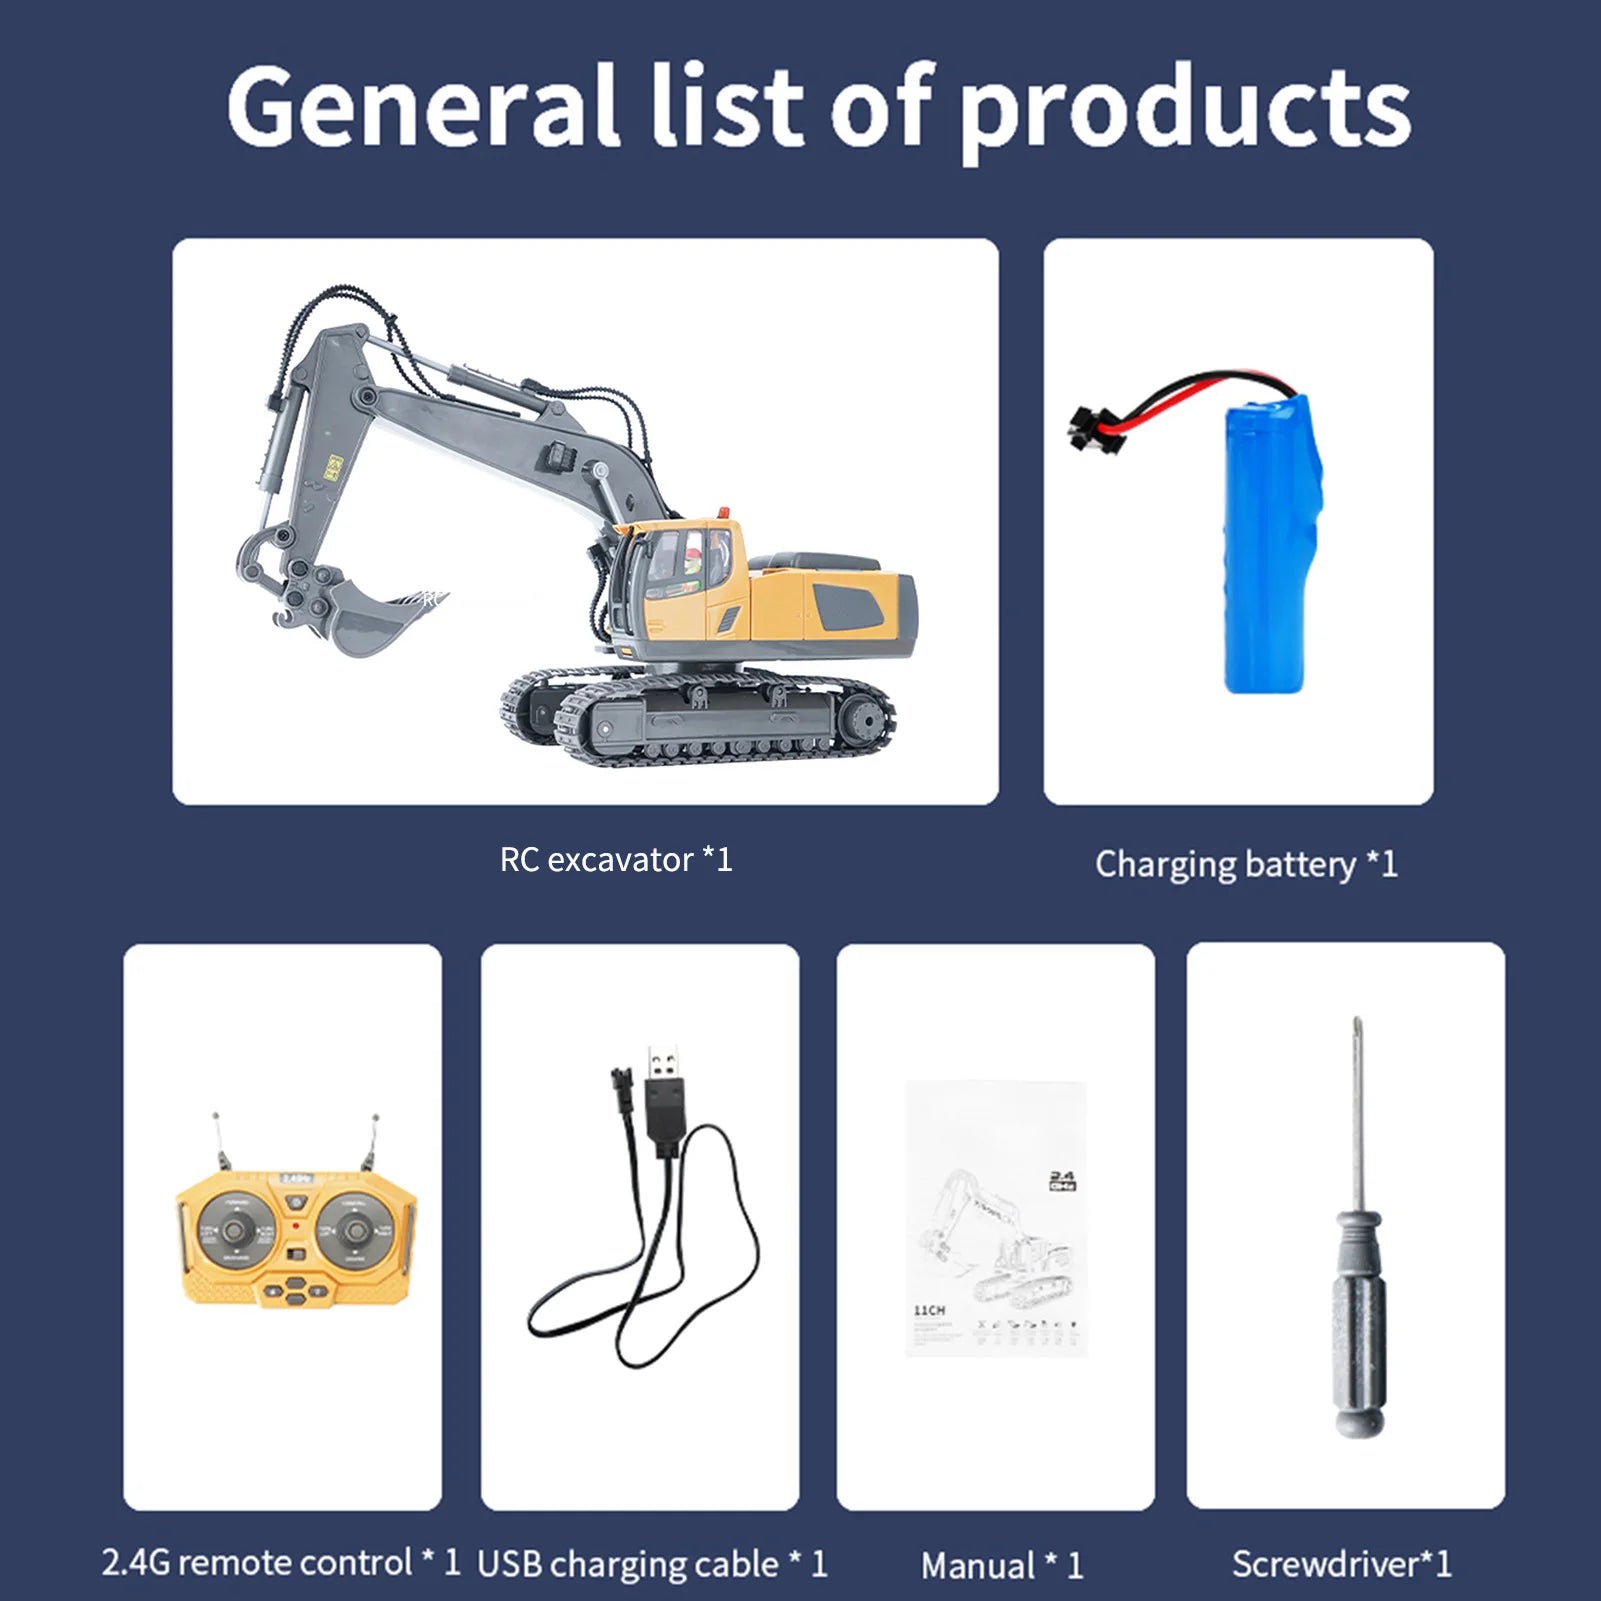 general list of products RC excavator 1 Charging battery *1 Hch 